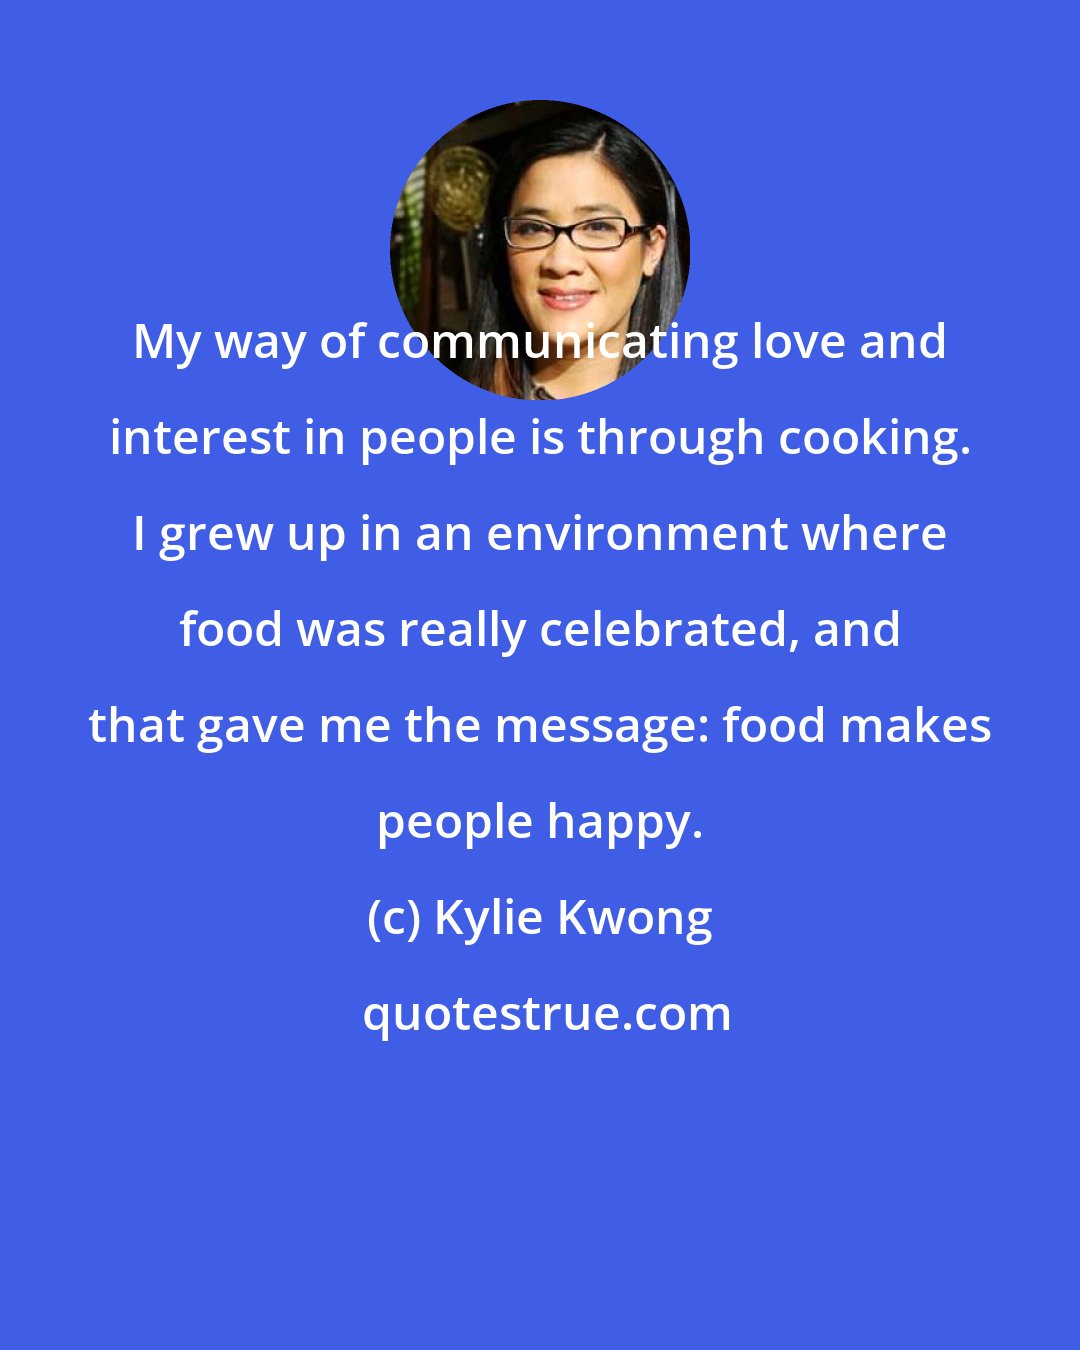 Kylie Kwong: My way of communicating love and interest in people is through cooking. I grew up in an environment where food was really celebrated, and that gave me the message: food makes people happy.